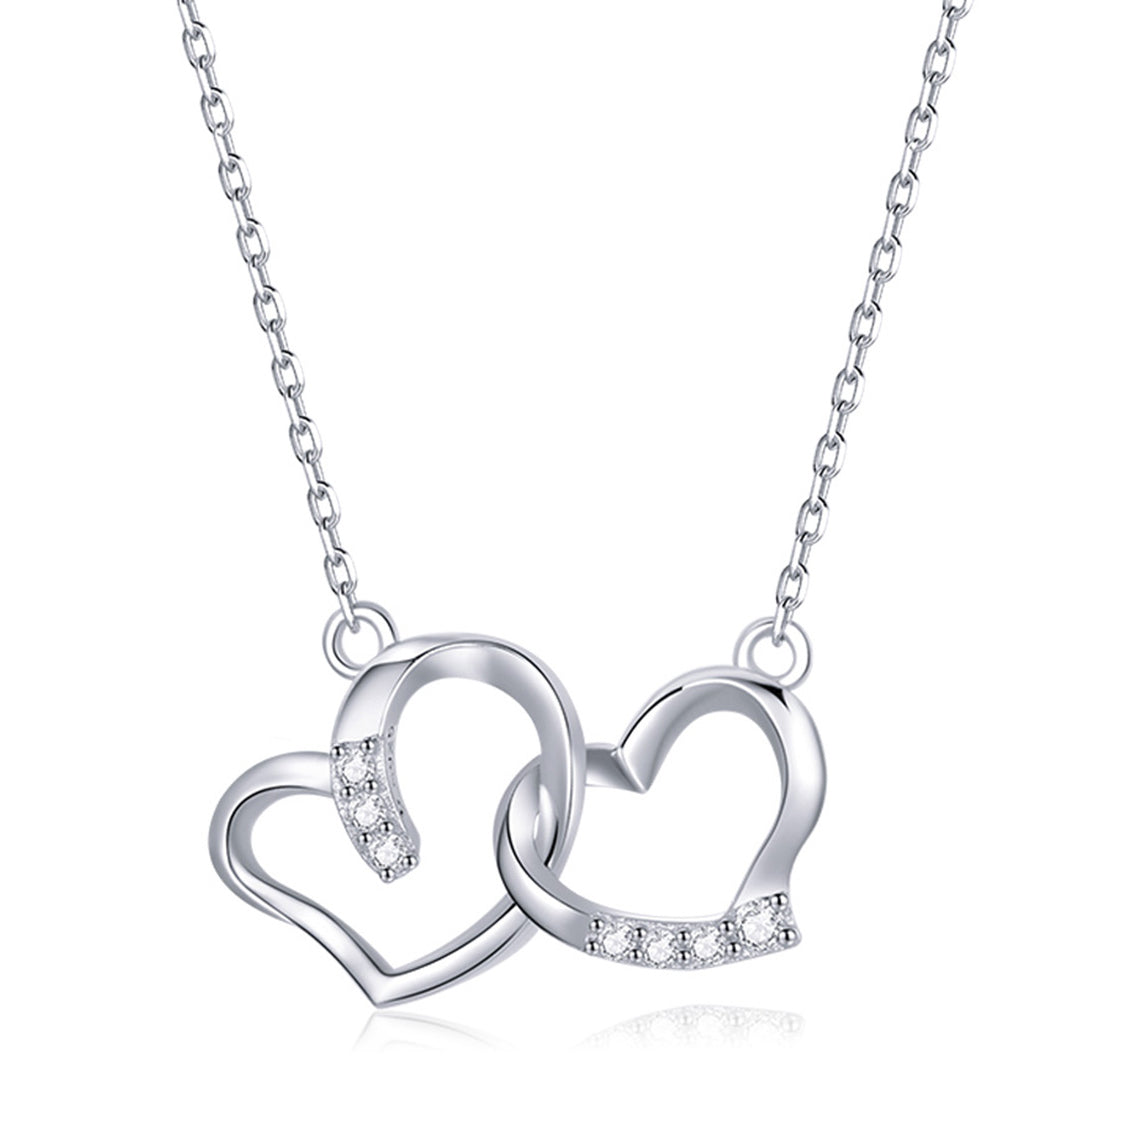 Interlocking Hearts Necklace In Sterling Silver Platinum Plated - Bonjeur Precious                                                                                                             